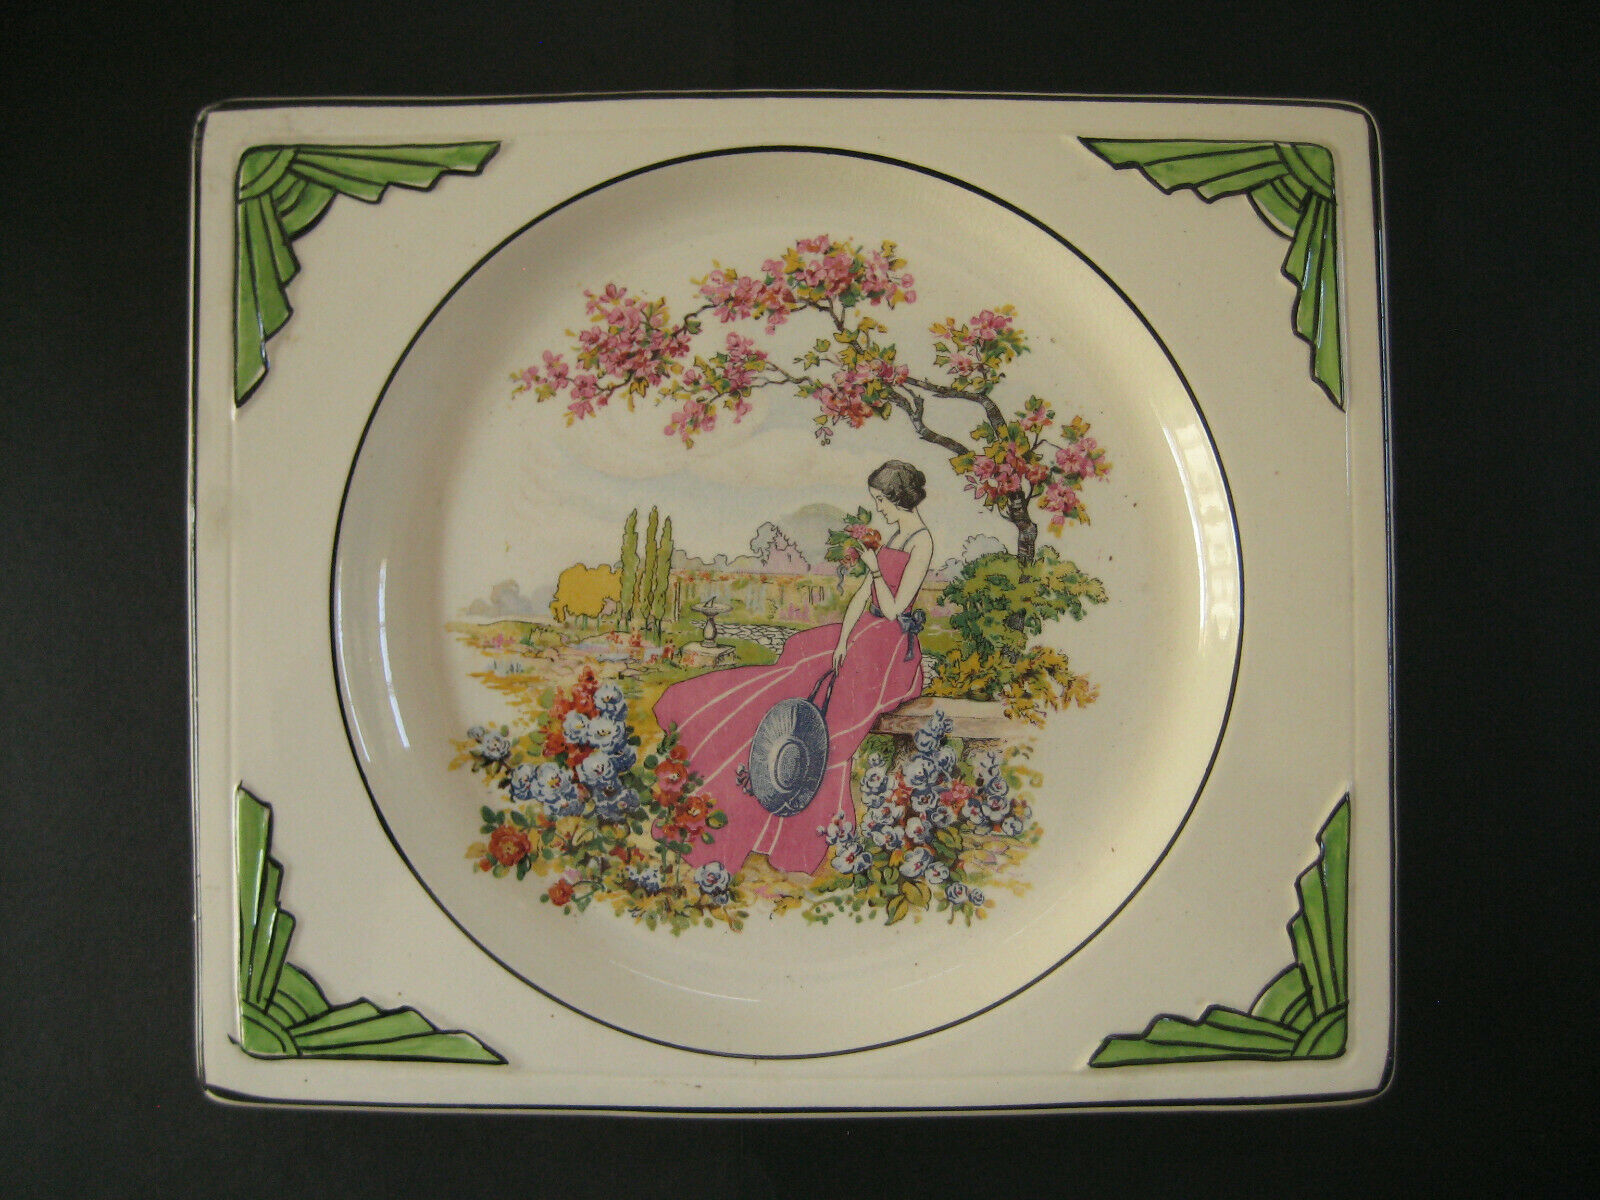 The Biarritz - Royal Staffordshire Art Deco Plate - Lady In Landscaped Garden